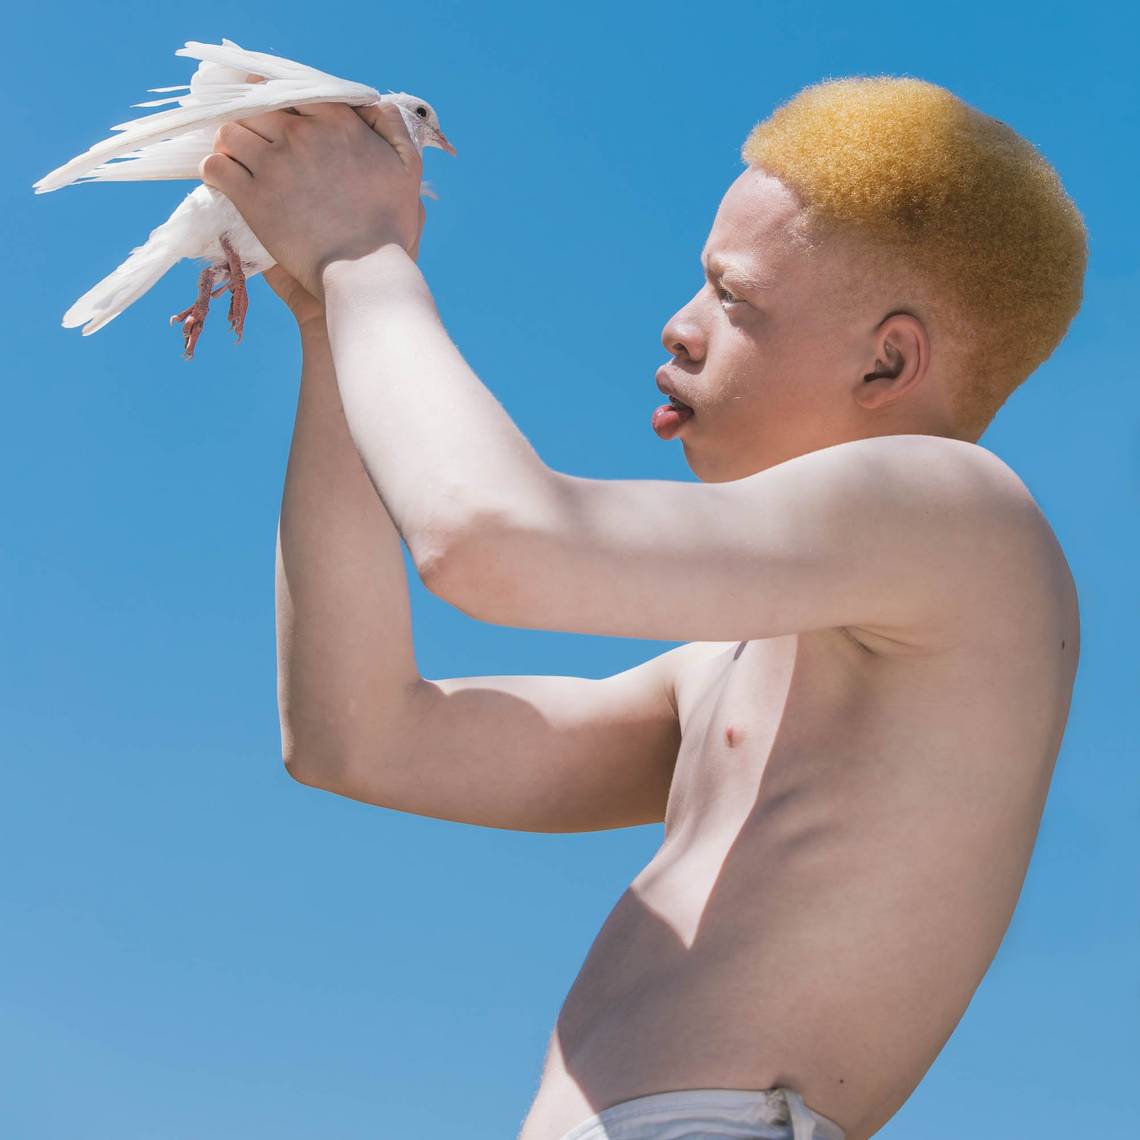 A male albino model holds a dove in front of a clear blue sky.